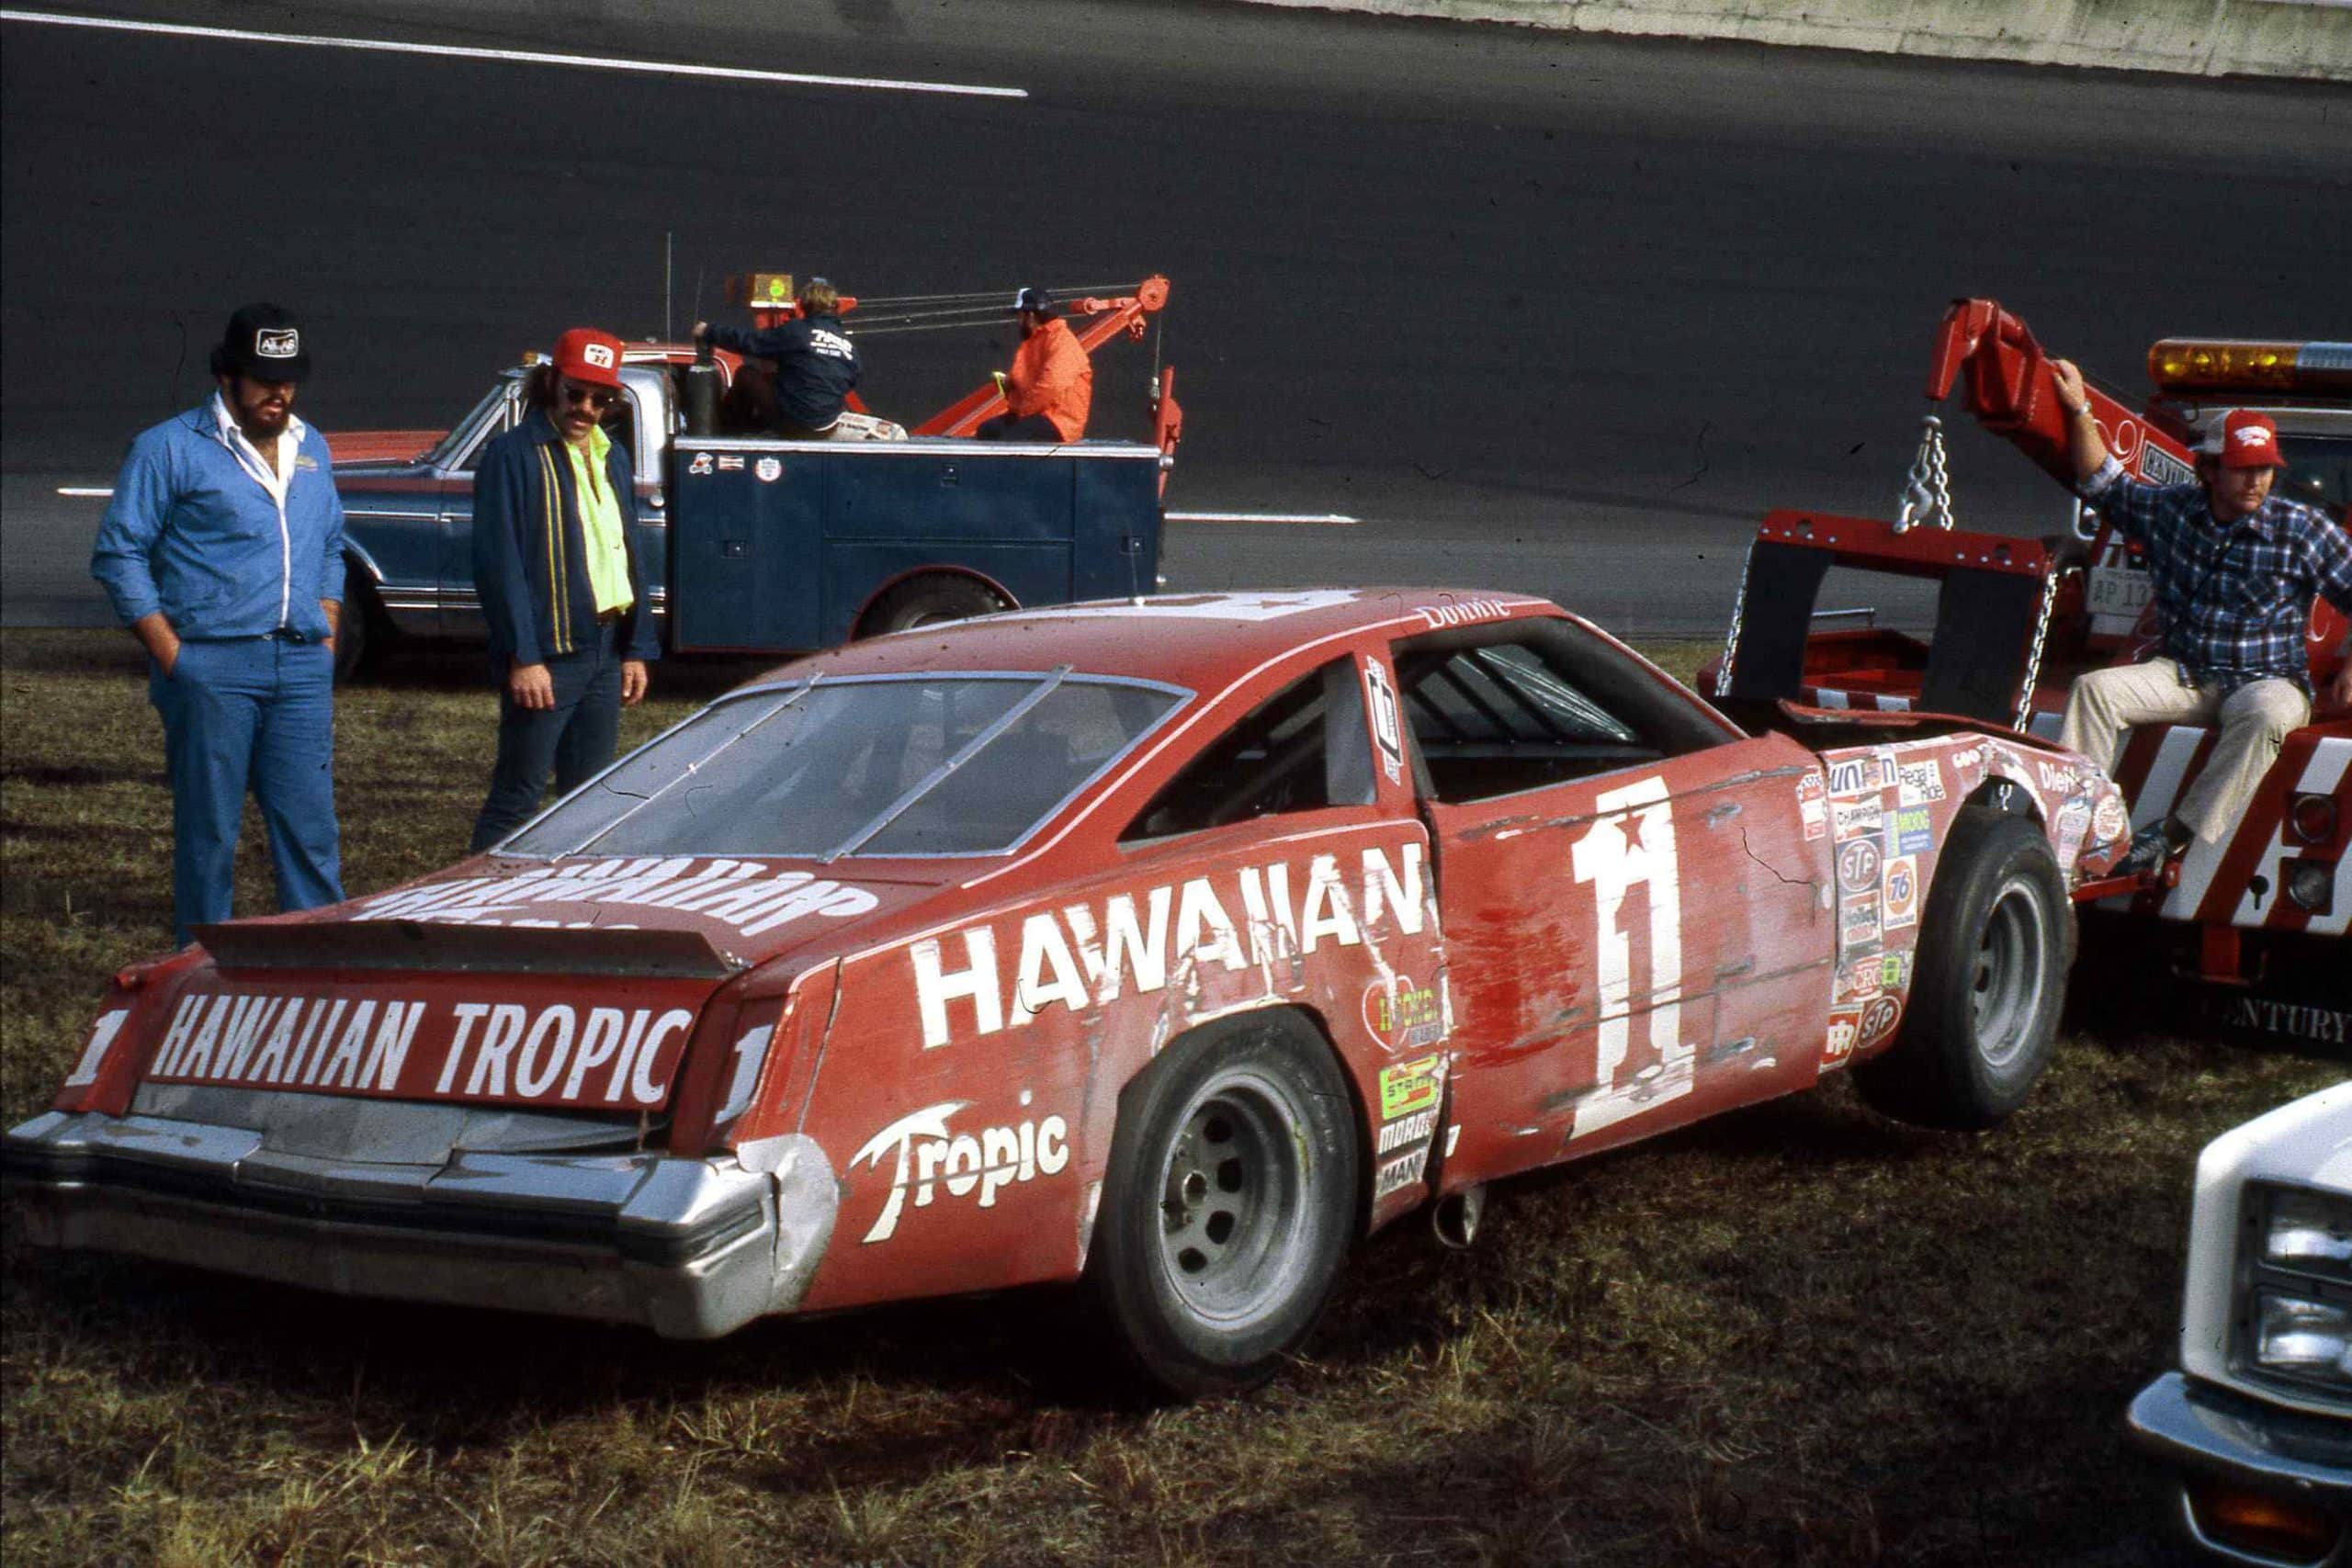 Donnie Allison’s wrecked Oldsmobile had to be pulled out of the Daytona infield by a wrecker. Photo courtesy of NASCAR Archives & Research Center via Getty Images